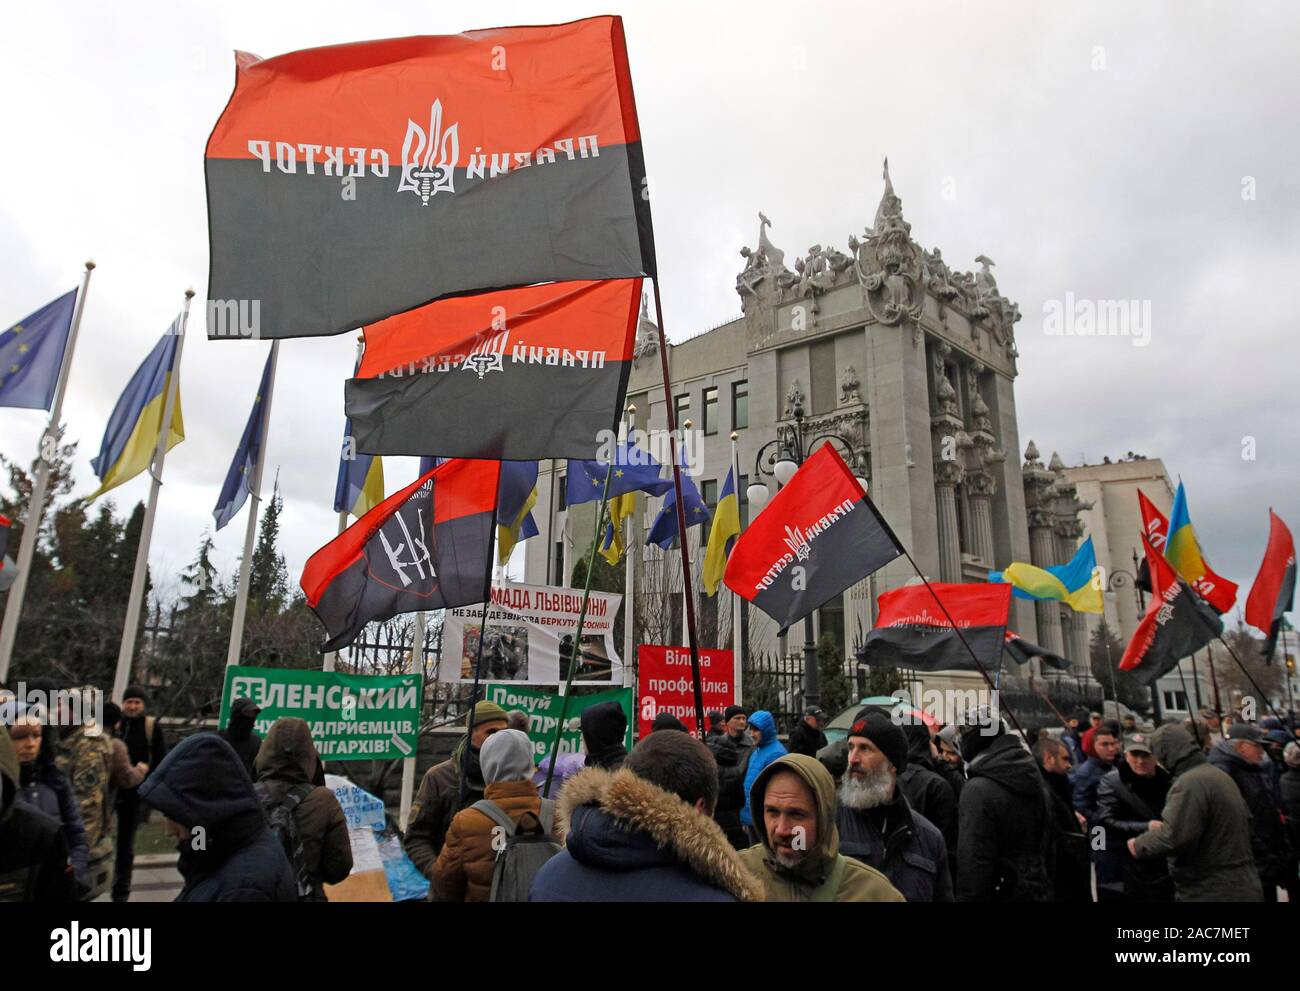 Ukrainian activists from Right sector far-right political party and their supporters hold flags during a rally outside the Presidential Office in Kiev.The activists demand to break the diplomatic and economic relations with Russia and the inadmissibility of any concessions to Russia, during their rally dedicated to the Euromaidan clashes anniversary. The nationalists mark the 6th anniversary of the first and mass clashes protestors with police near the Presidential Administration of President Viktor Yanukovich on 1 December 2013, of the Euromaidan Revolution times. Stock Photo